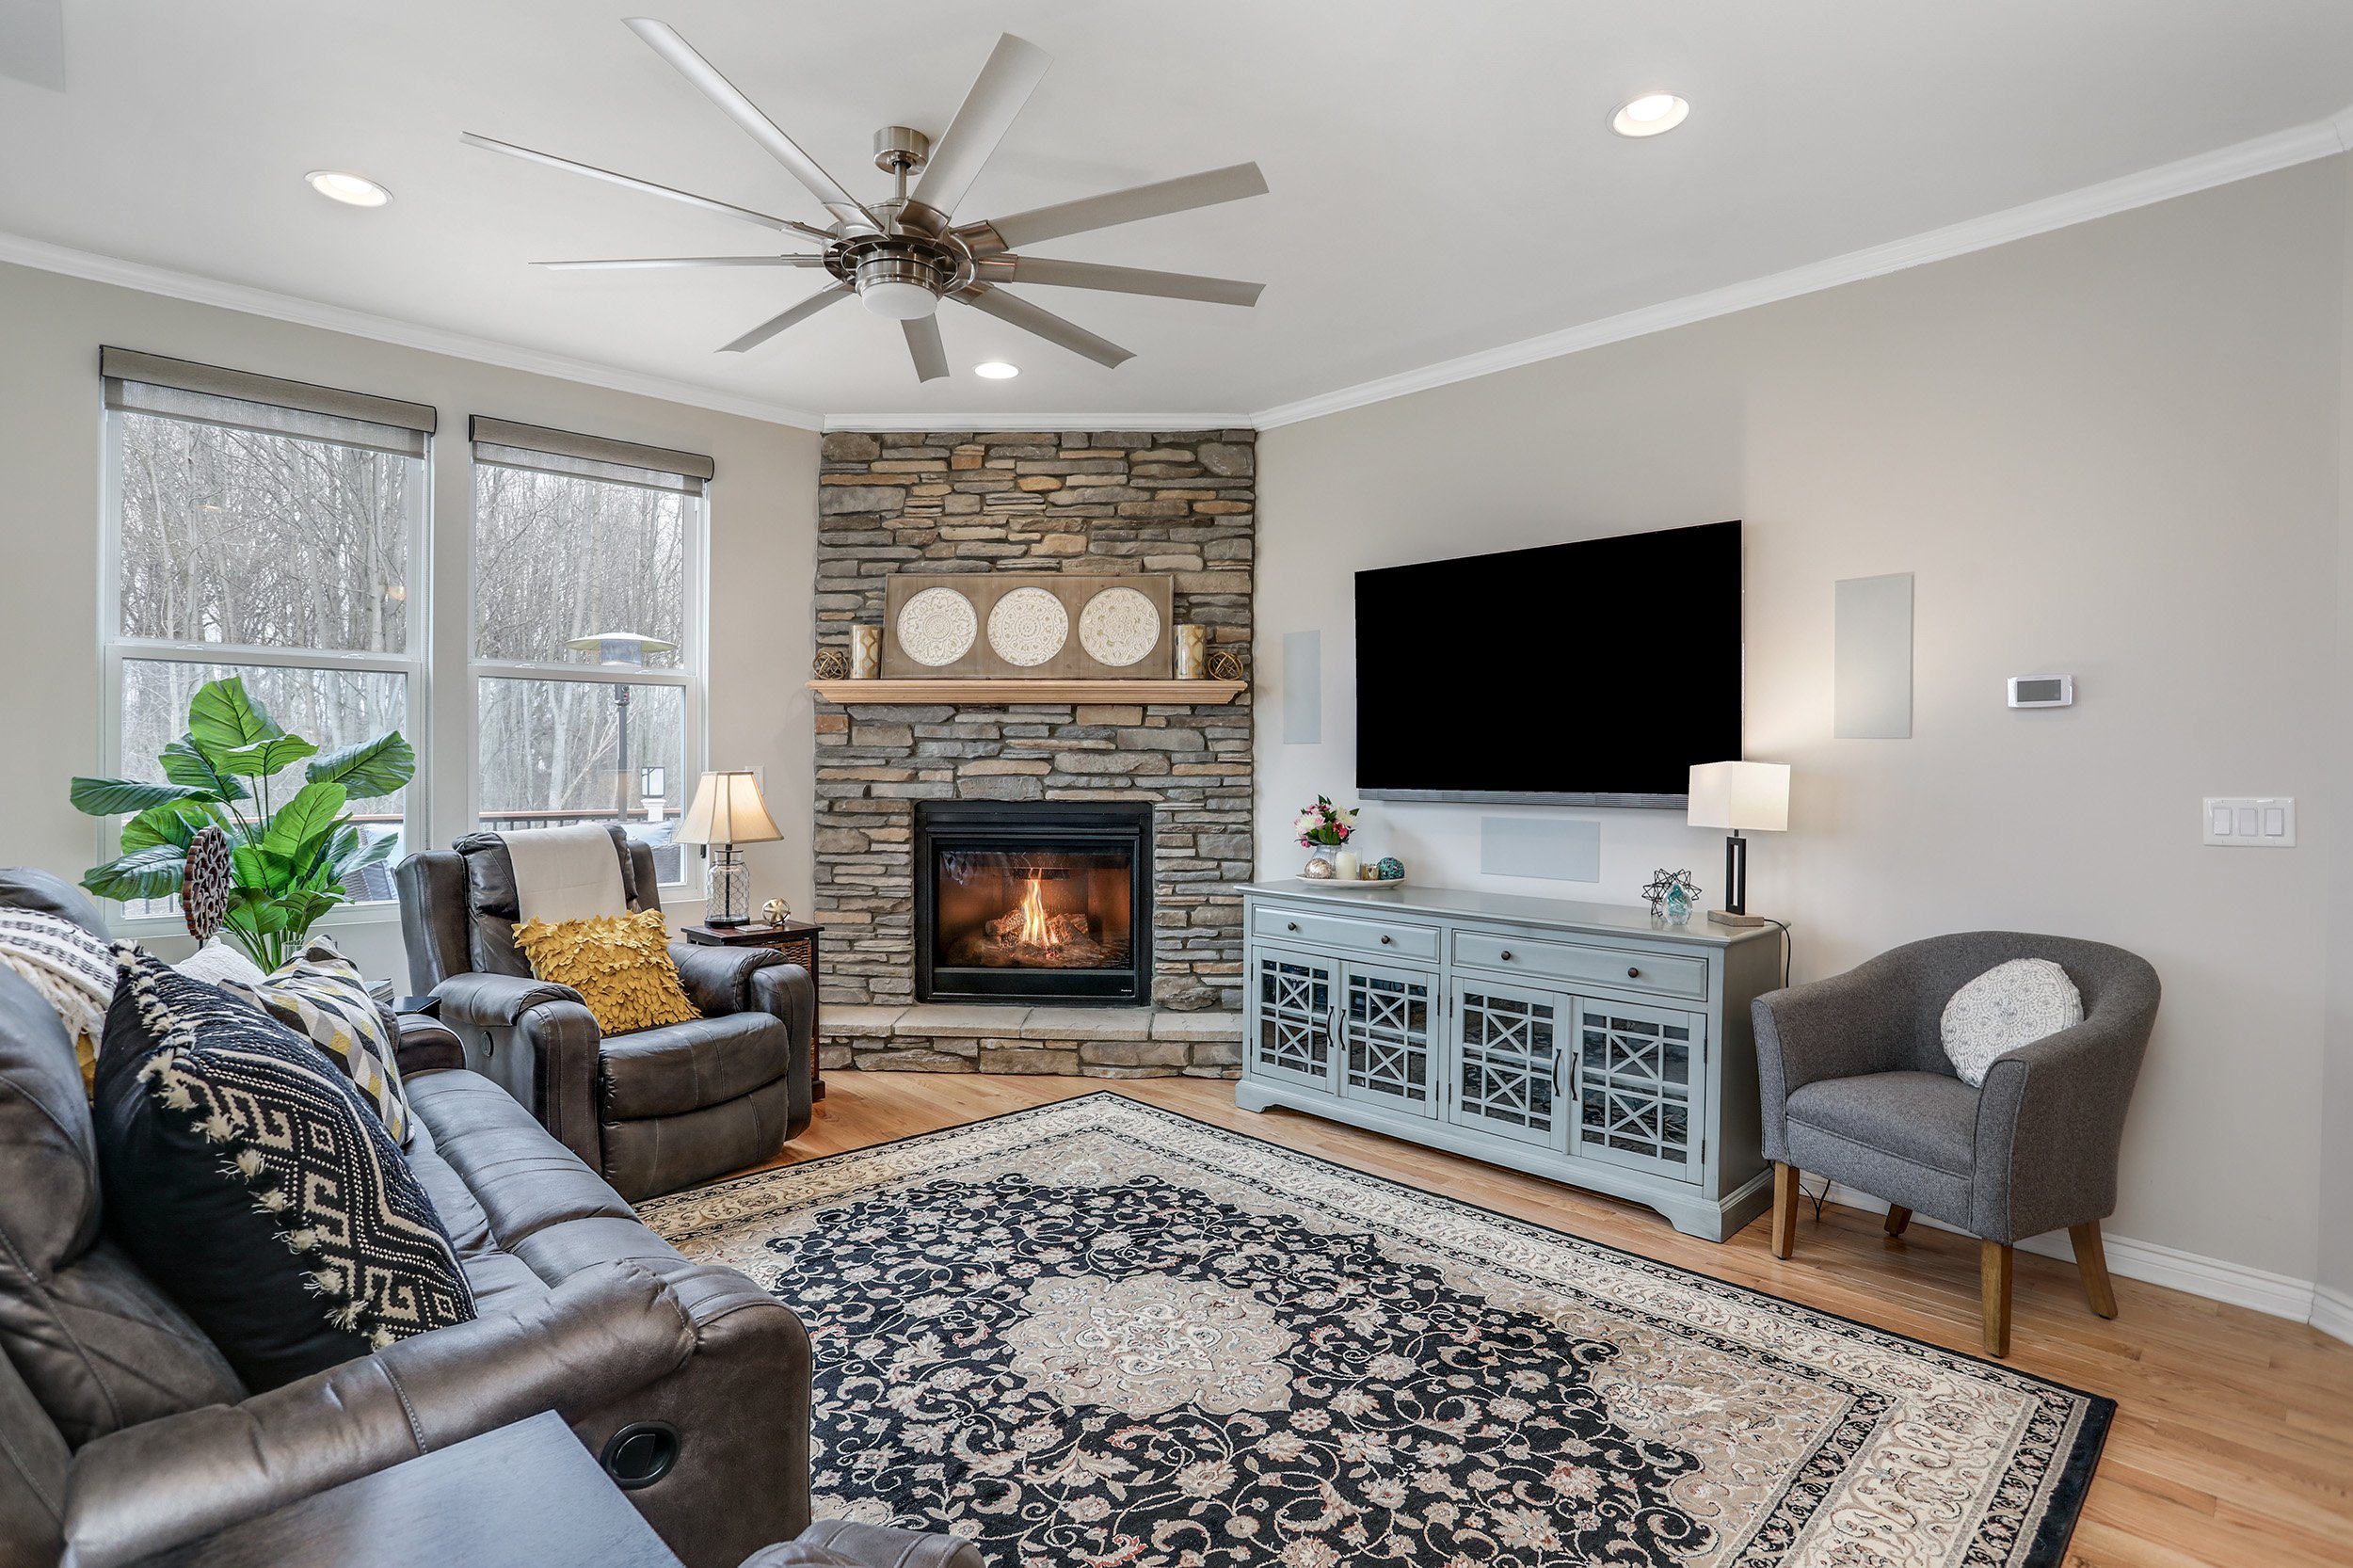  Canon Real Estate Photography - living room 